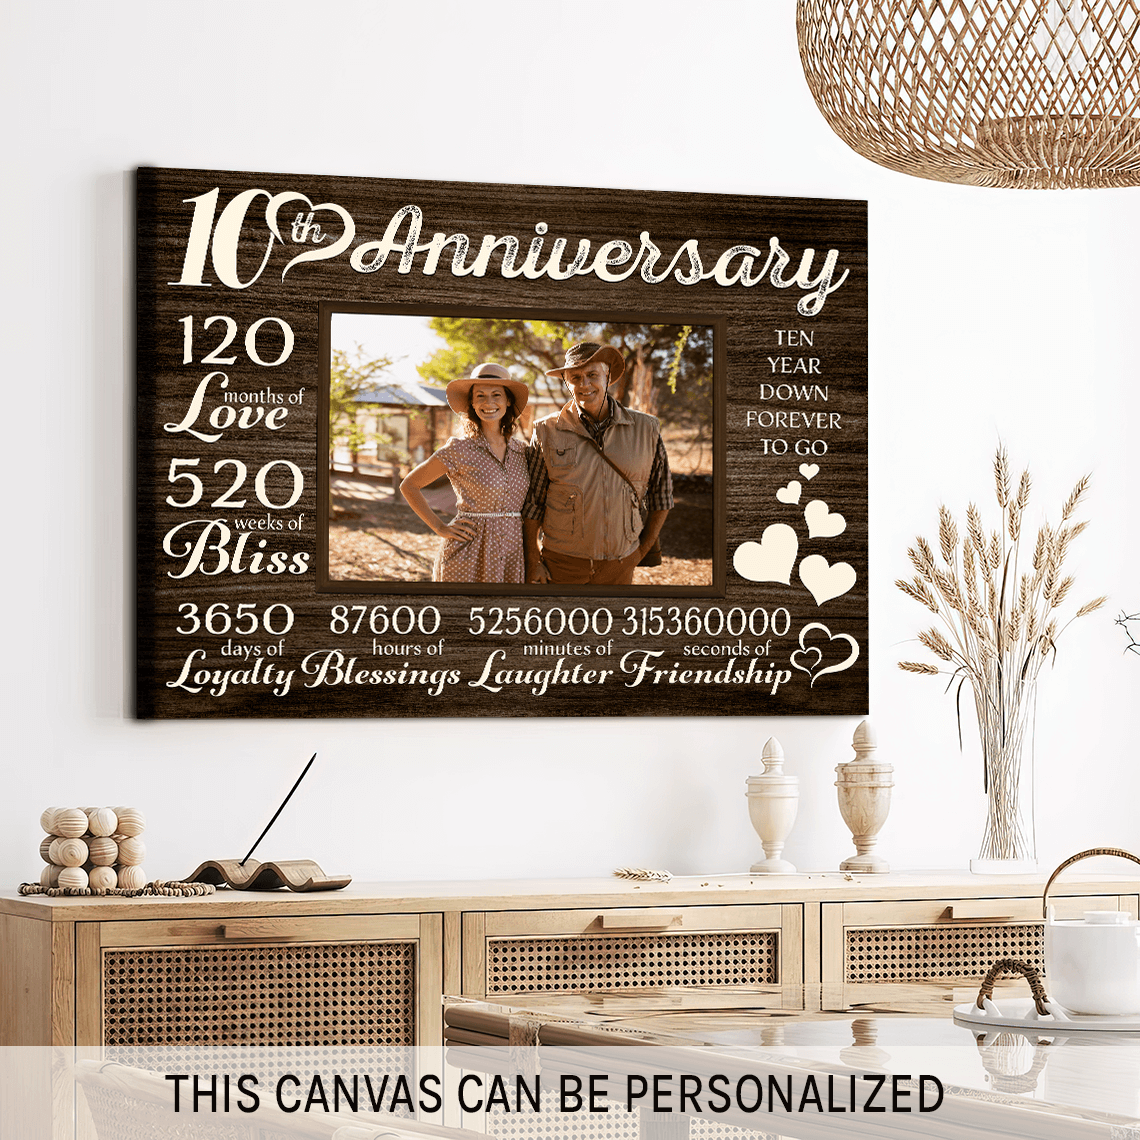 Personalized 10th Anniversary Gift For Him Wedding Anniversary